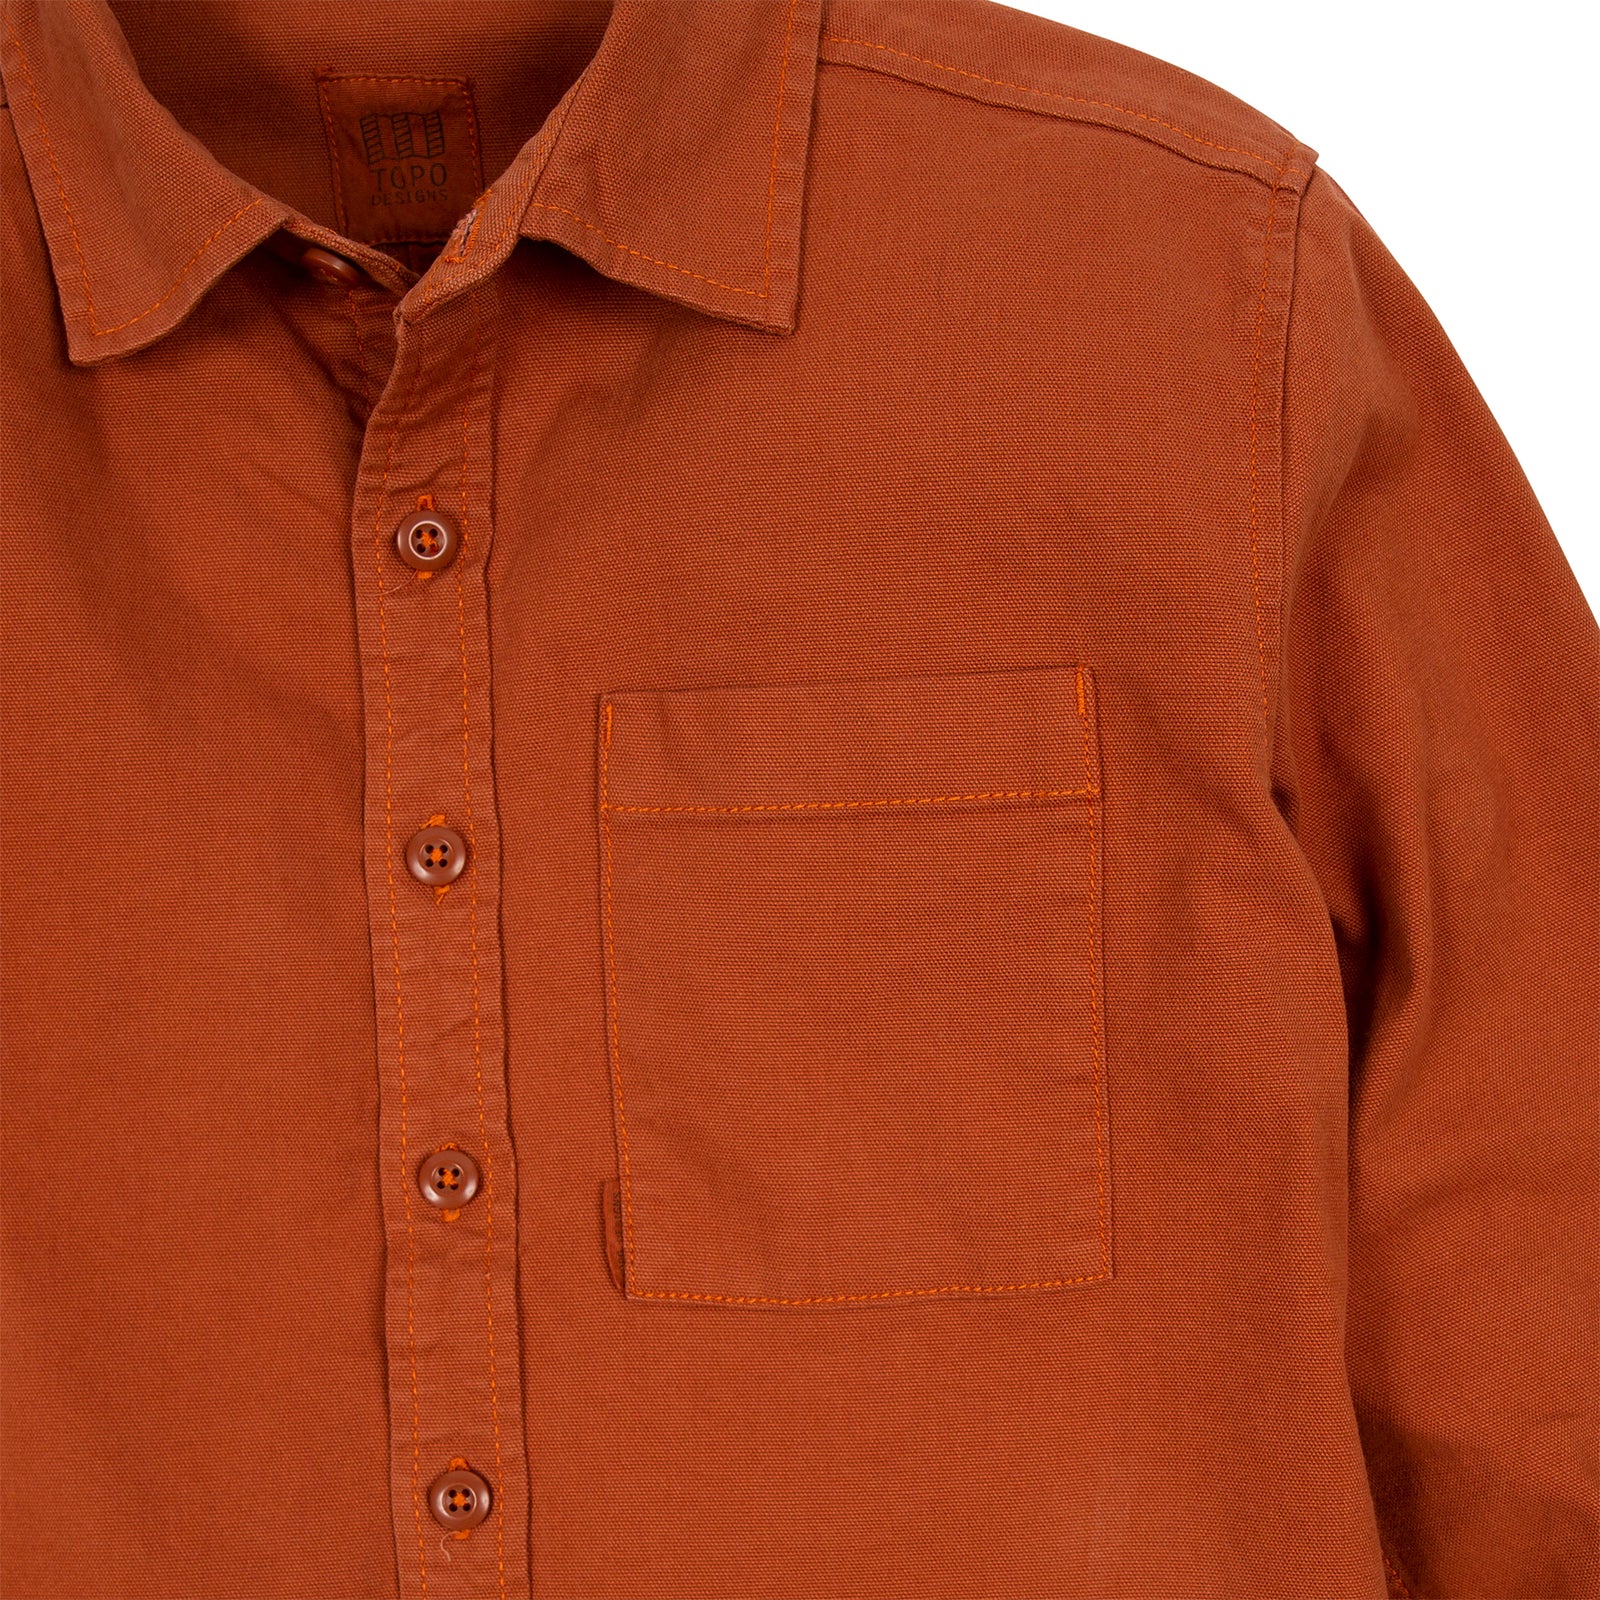 General detail shot of Topo Designs Women's Dirt Shirt in Brick orange showing front buttons and chest pocket.